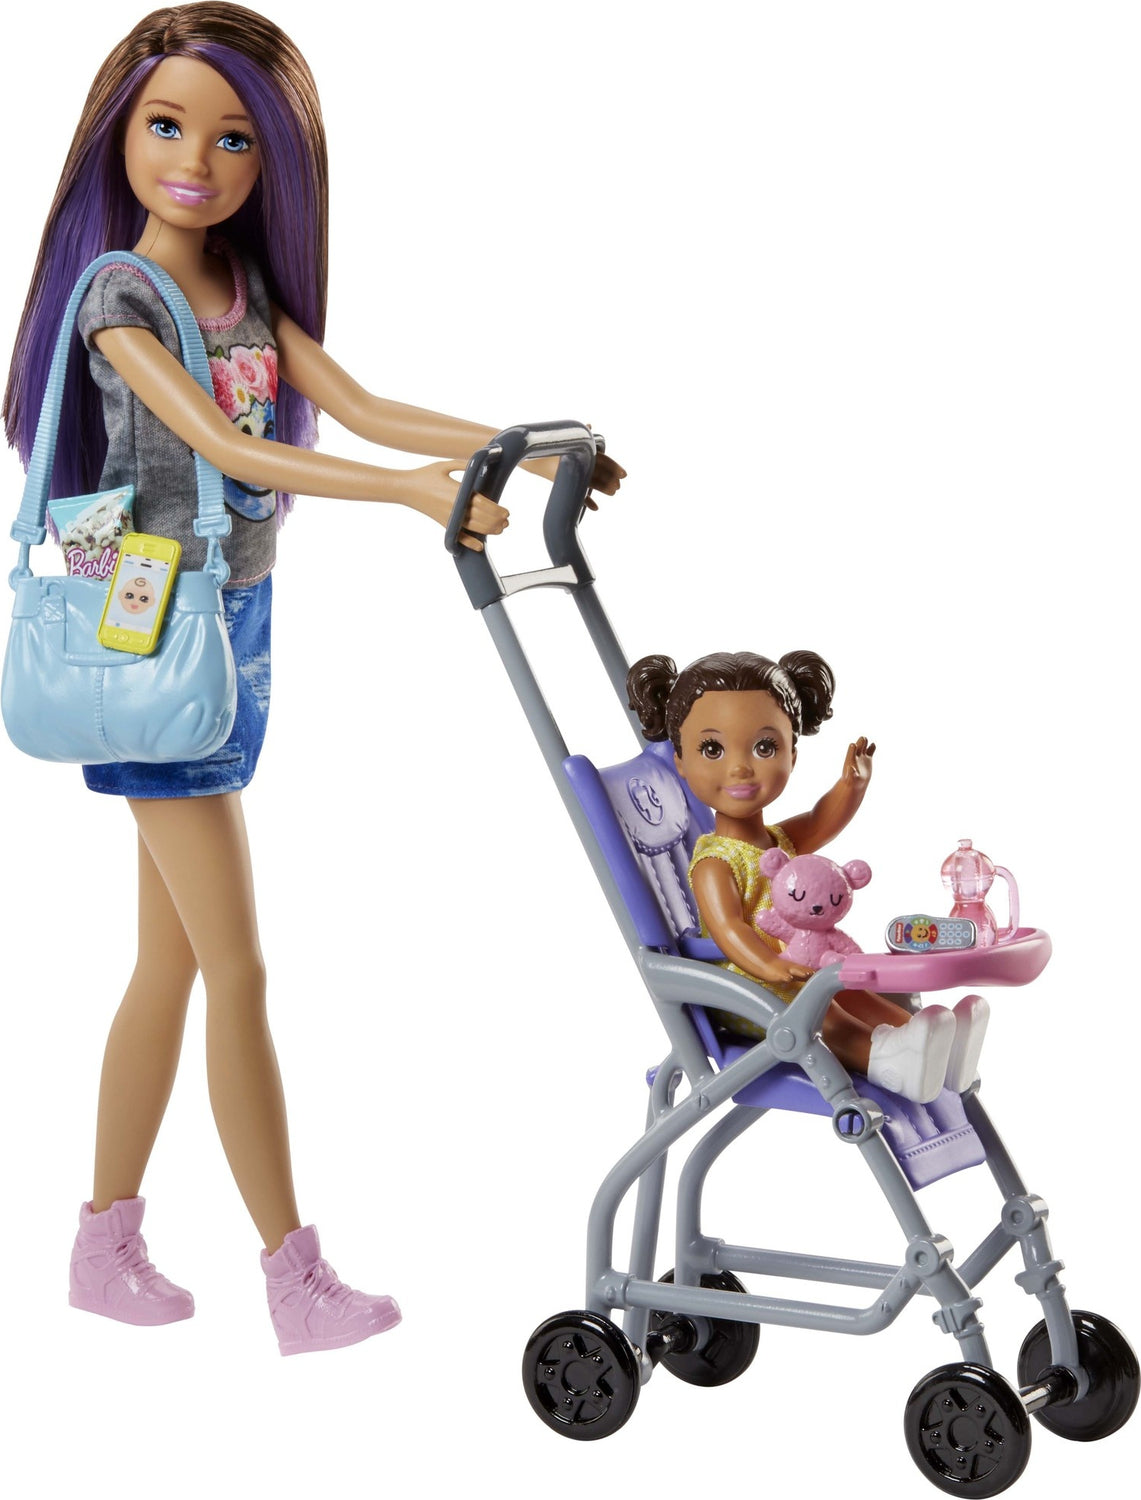 Barbie Skipper Babysitters Inc. Doll And Accessory . (assorted)